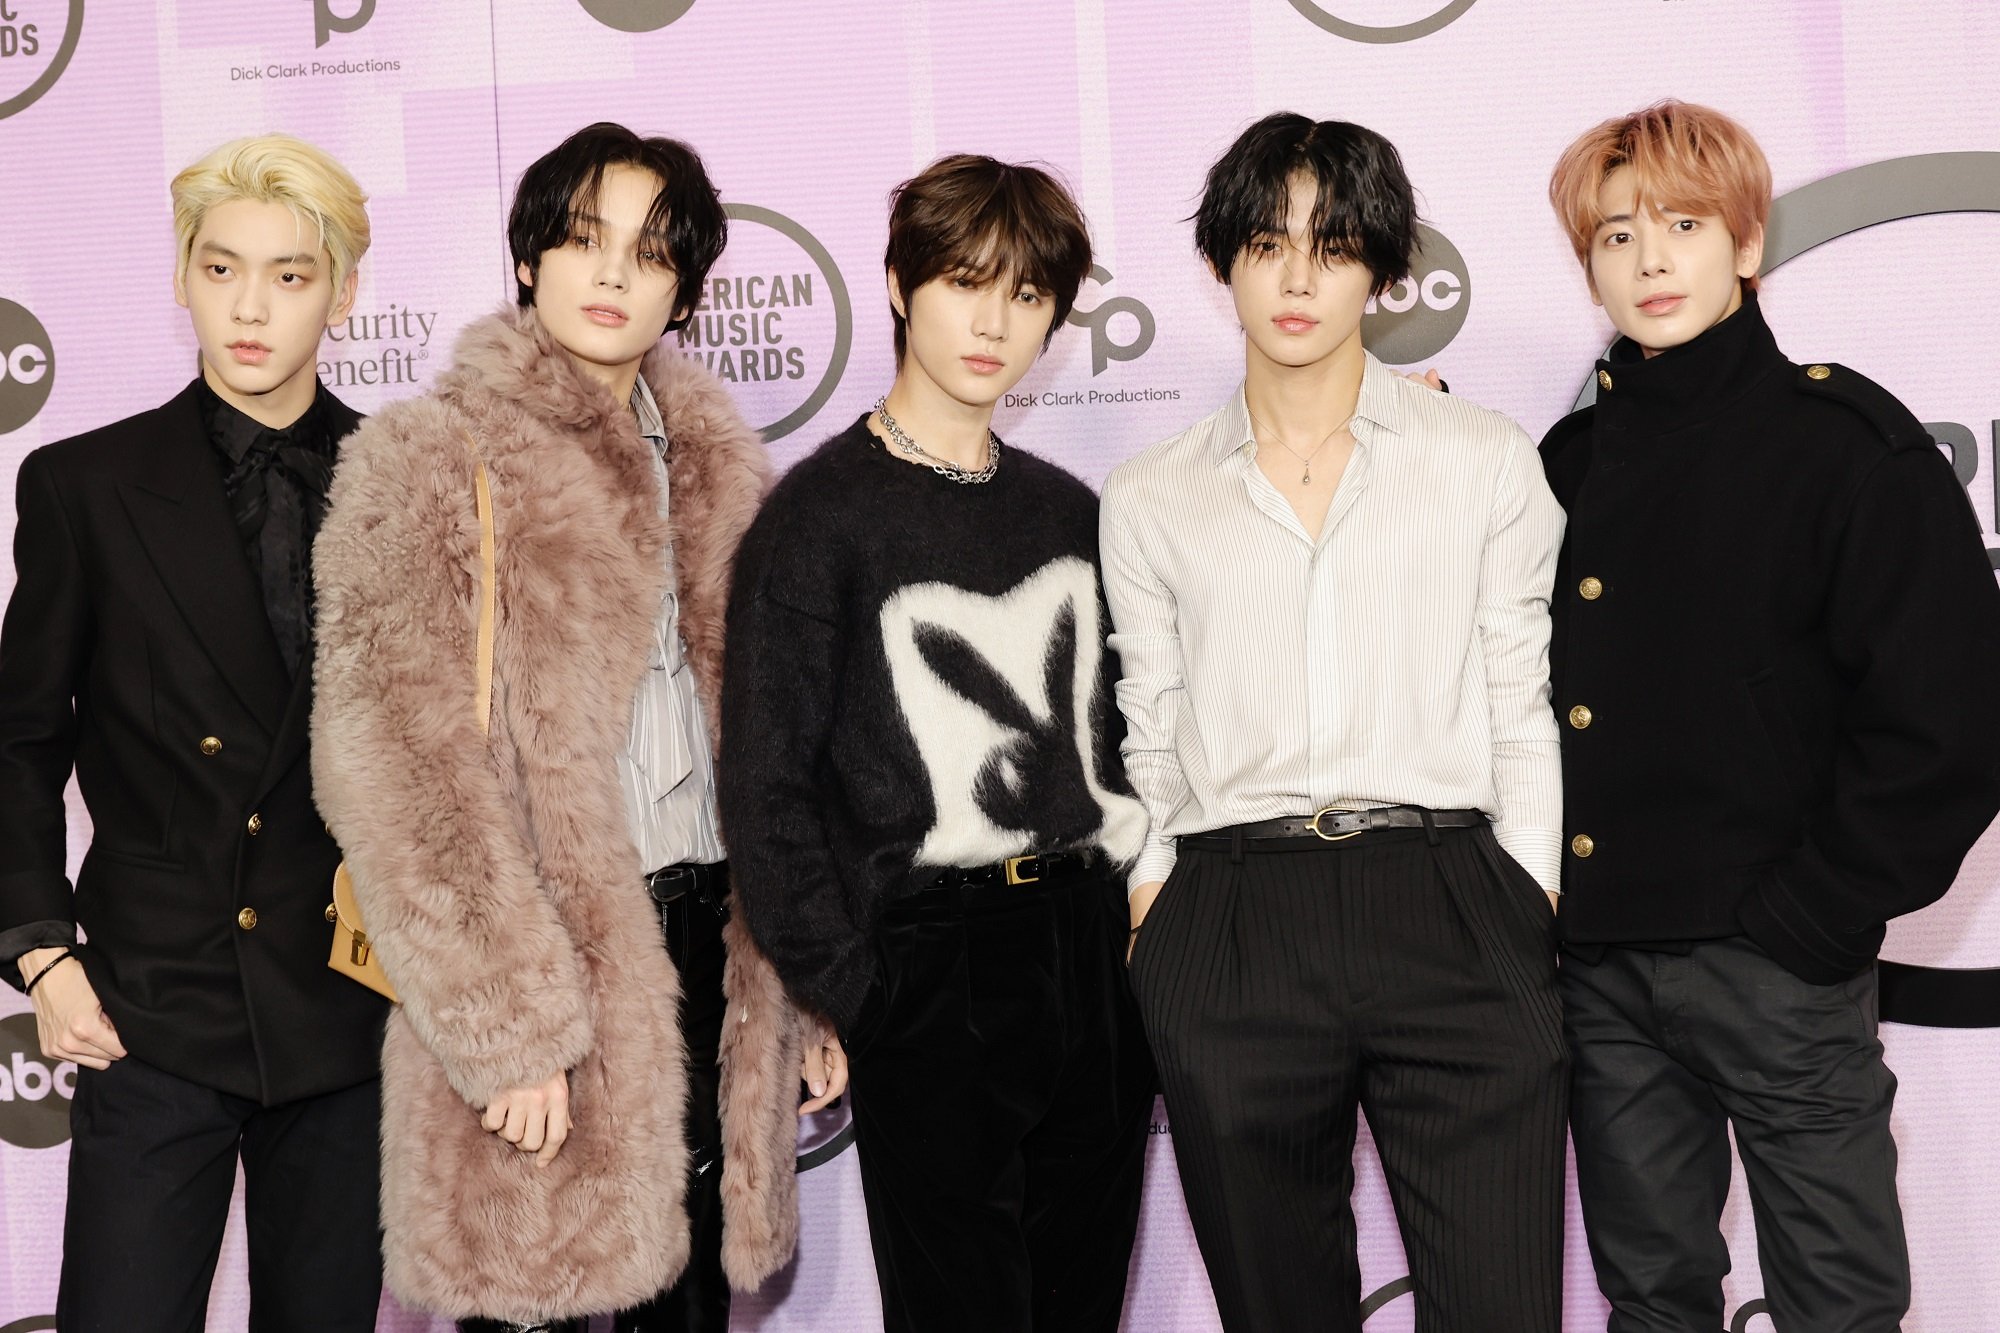 Soobin, Huening Kai, Beomgyu, Yeonjun, and Taehyun of TXT pose together in front of a backdrop that says 'American Music Awards'